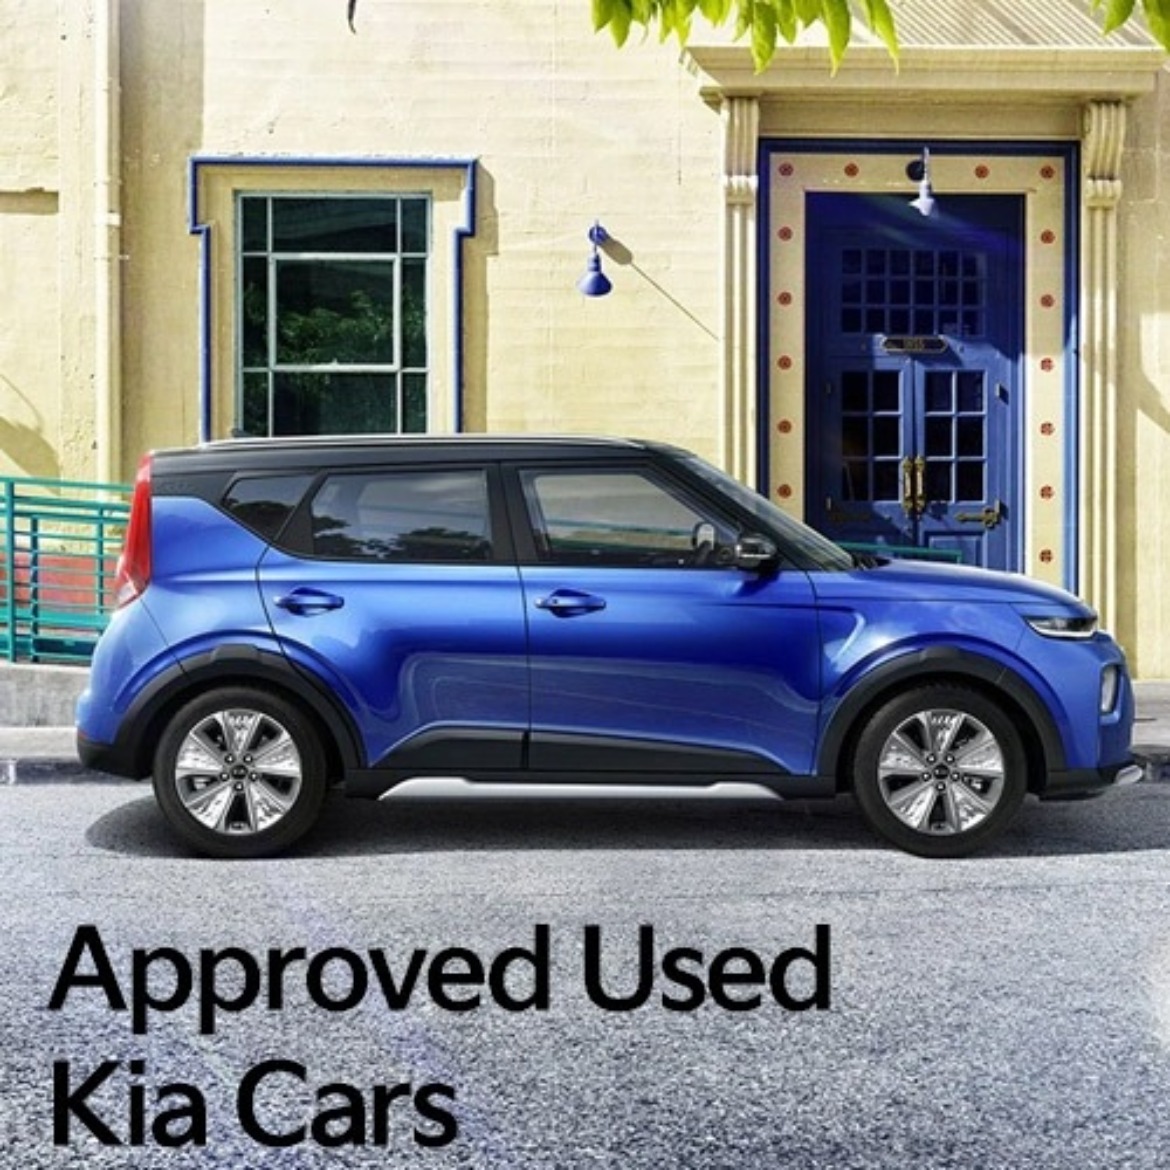 Kia Approved Used Cars in Boston, Louth & Grantham